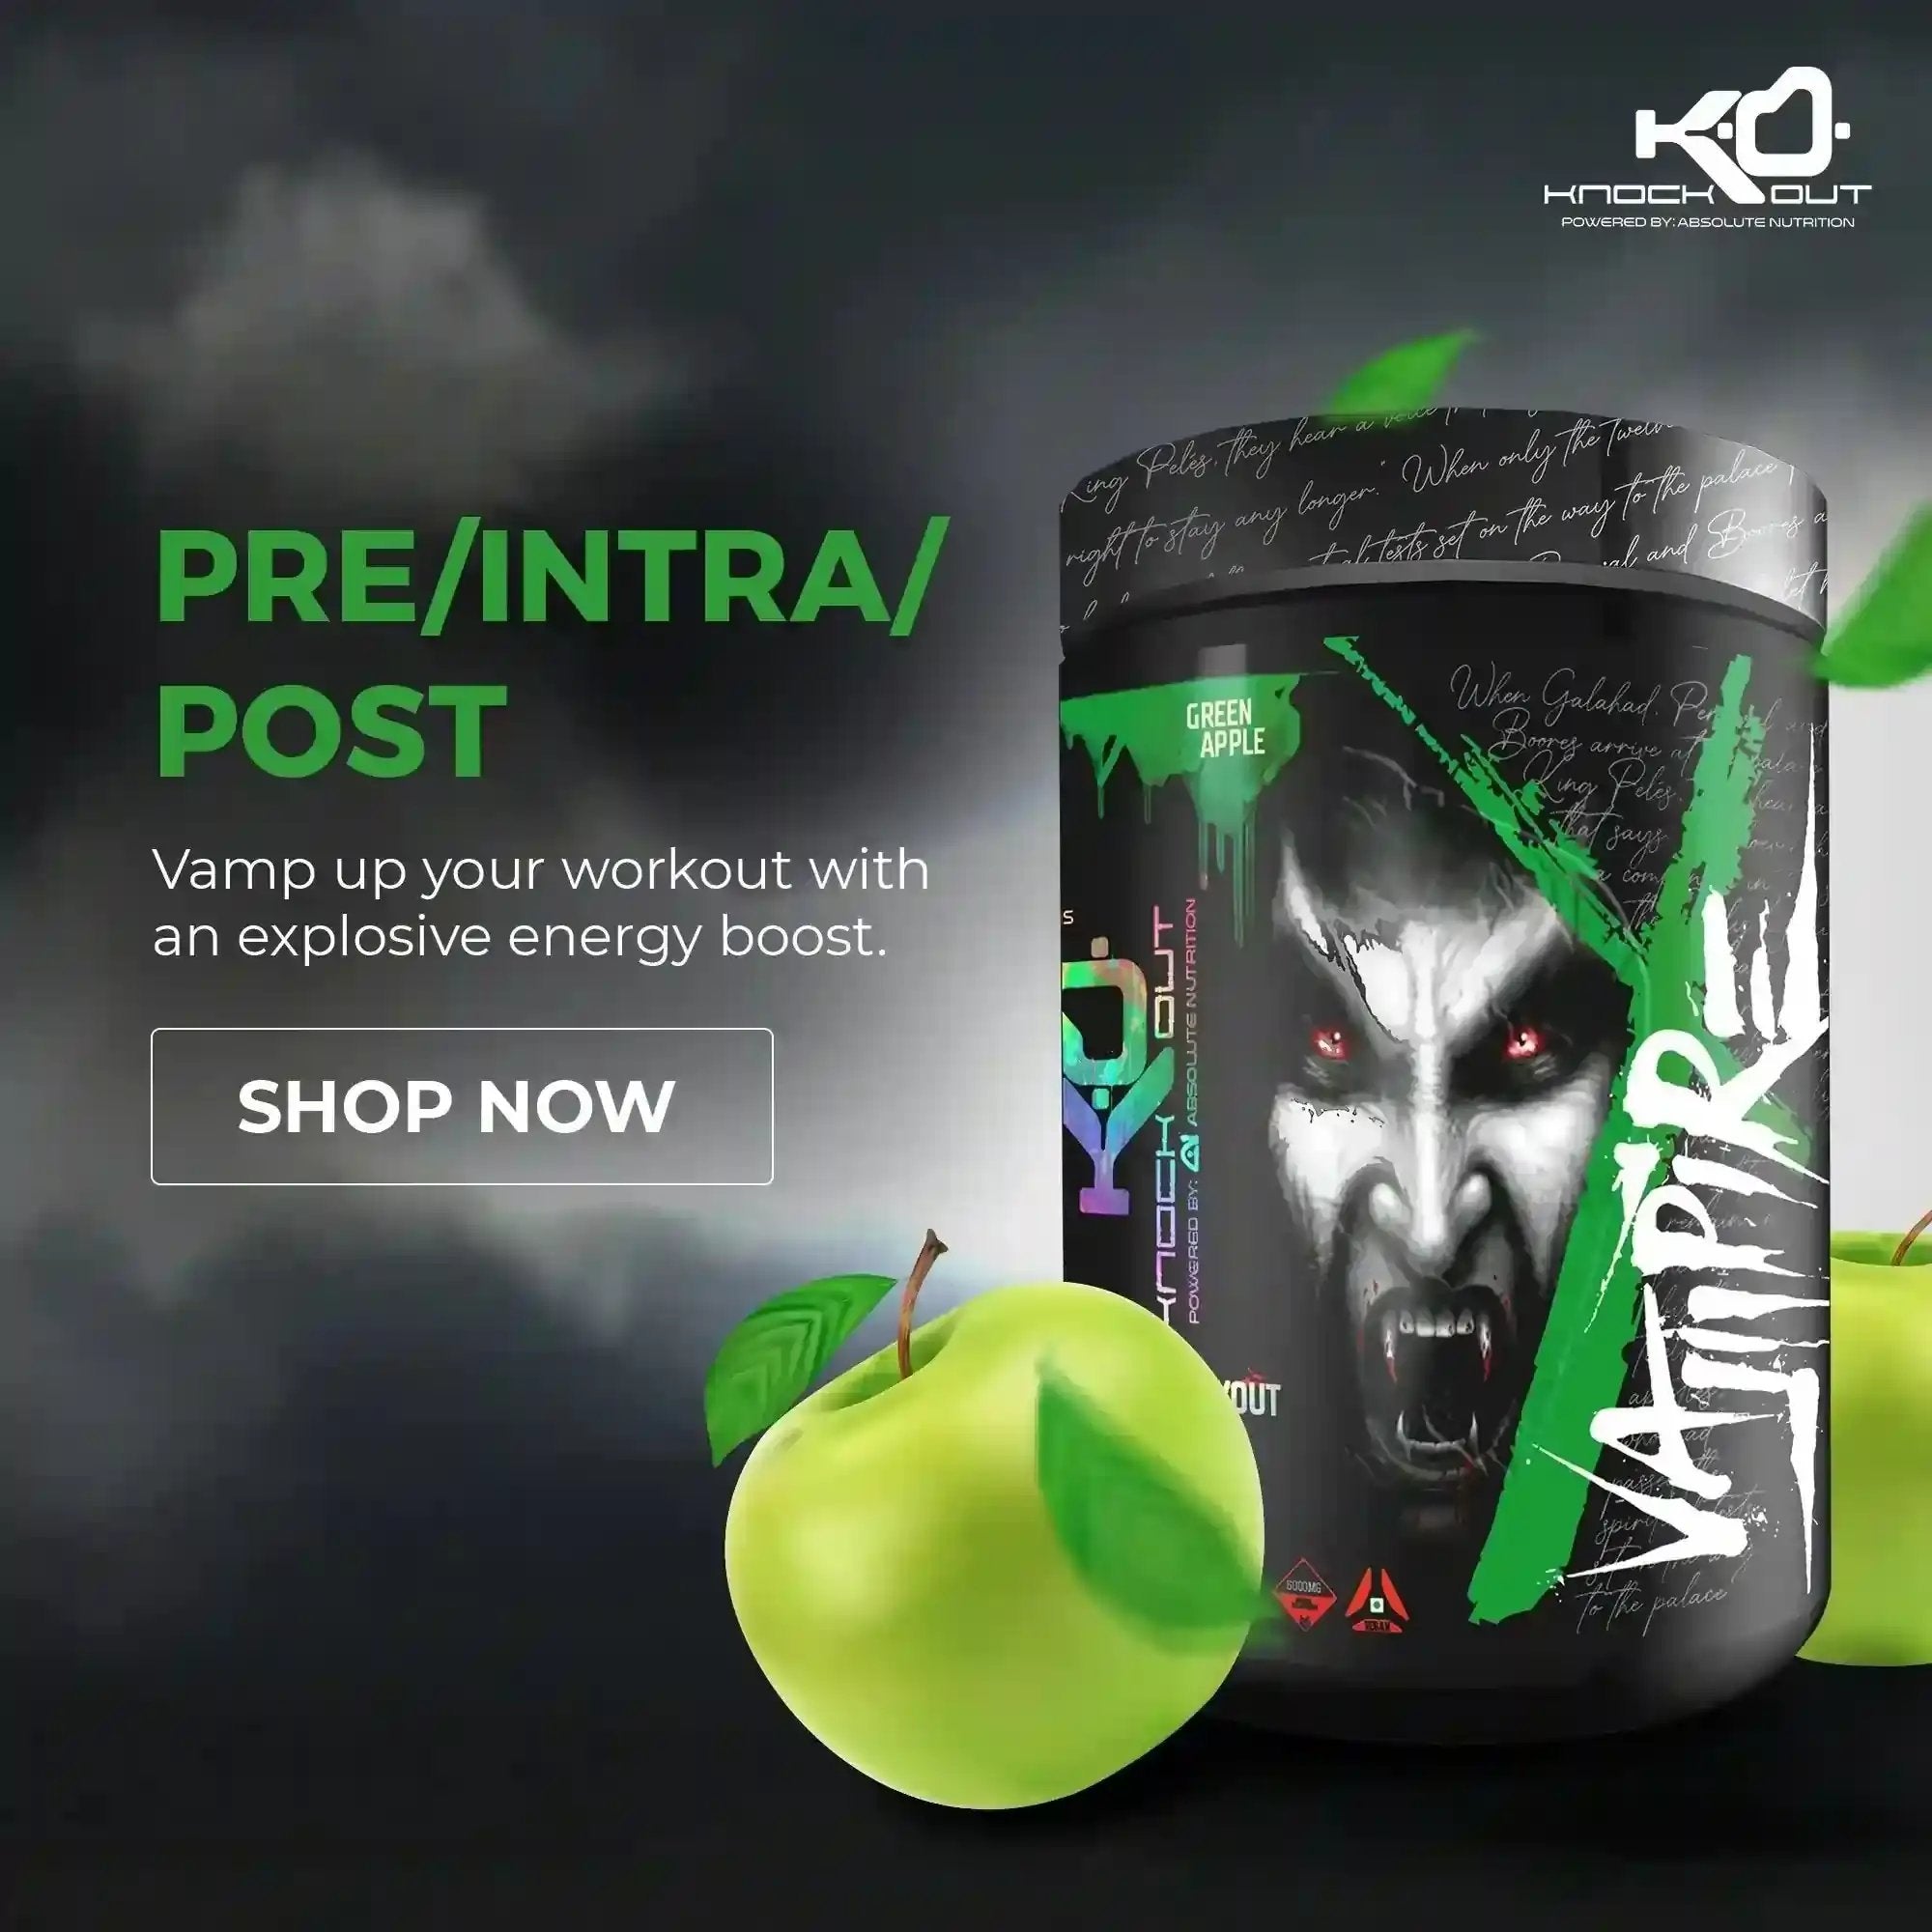 Best pre workout and Post workout supplements online by India's #1 Supplement Store - Knockout by Absolute Nutrition